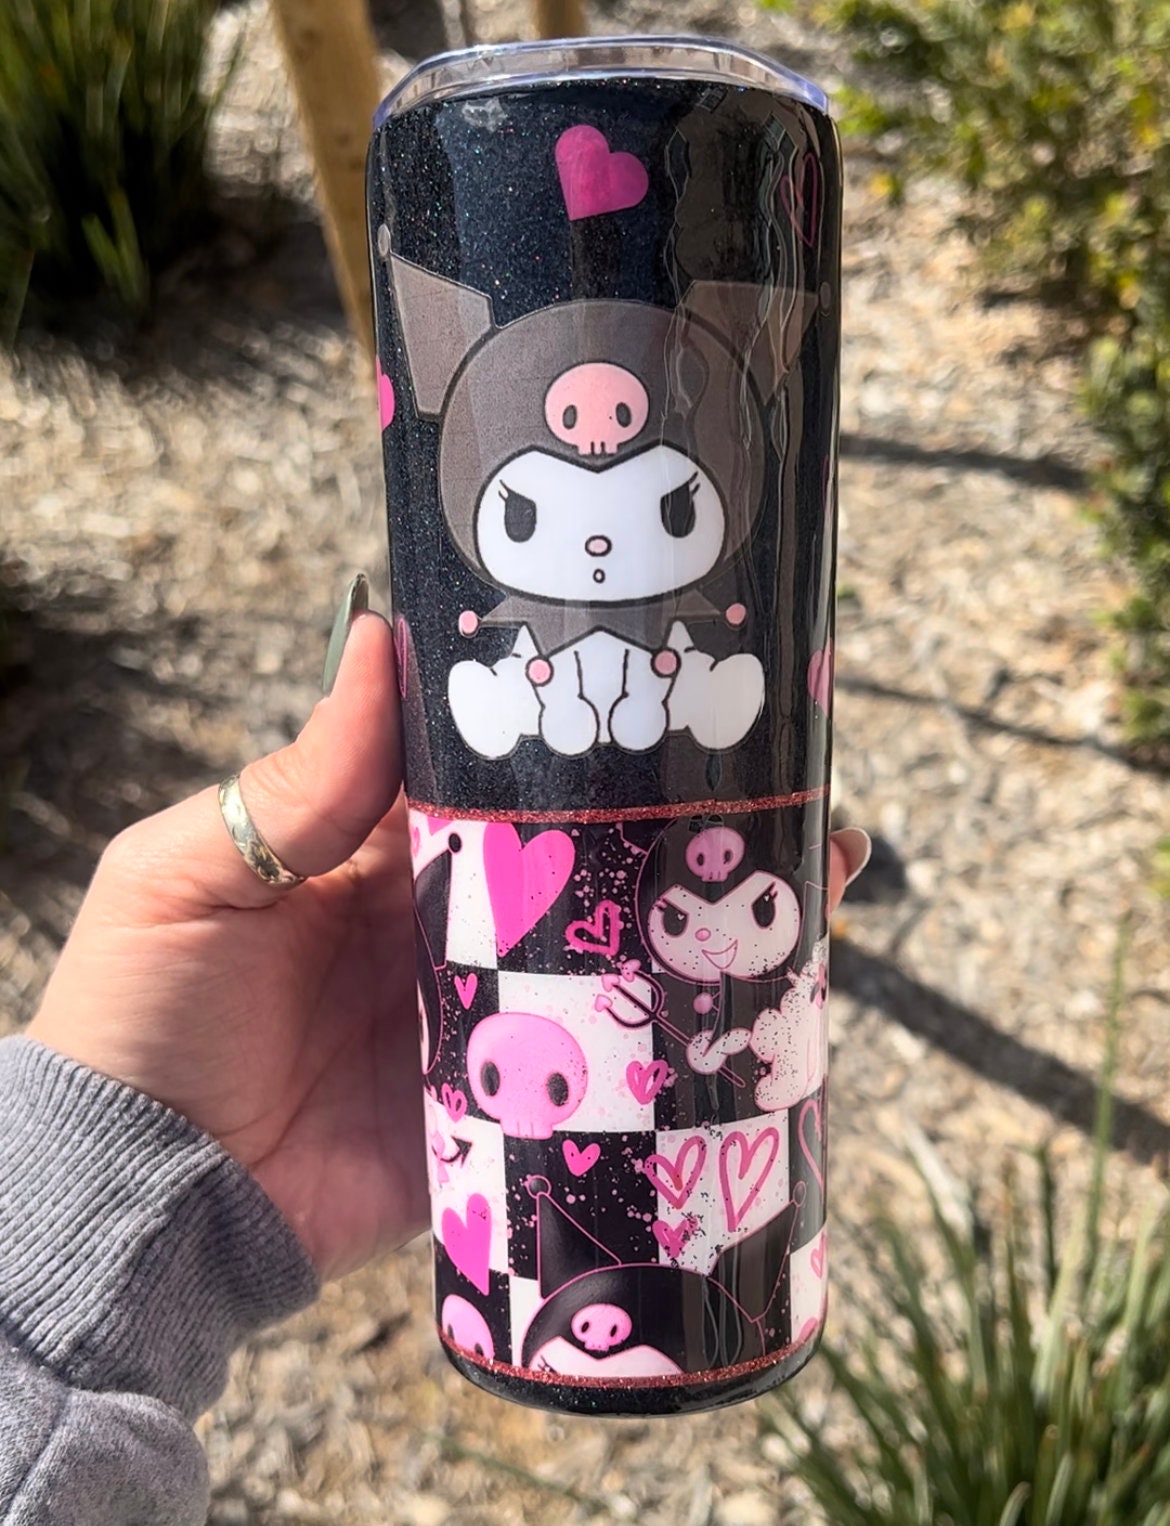 Aesthetic Tumbler I Bring to Class, Gallery posted by nrshamimie